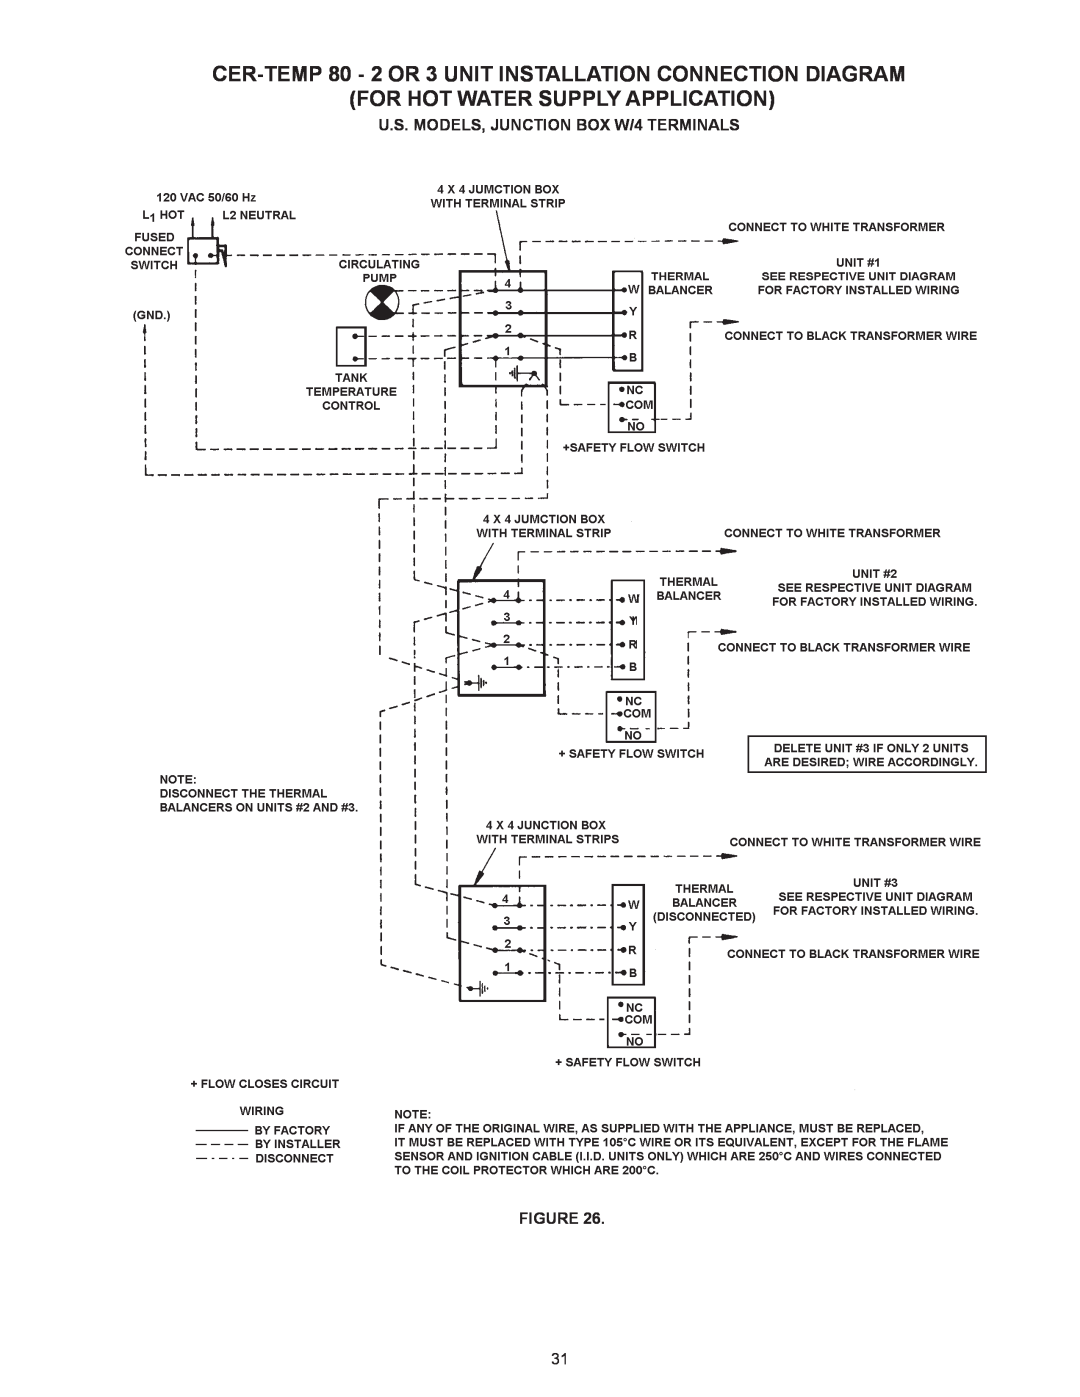 A.O. Smith HW 610 warranty CER-TEMP 80 - 2 OR 3 UNIT INSTALLATION CONNECTION DIAGRAM, For Hot Water Supply Application 